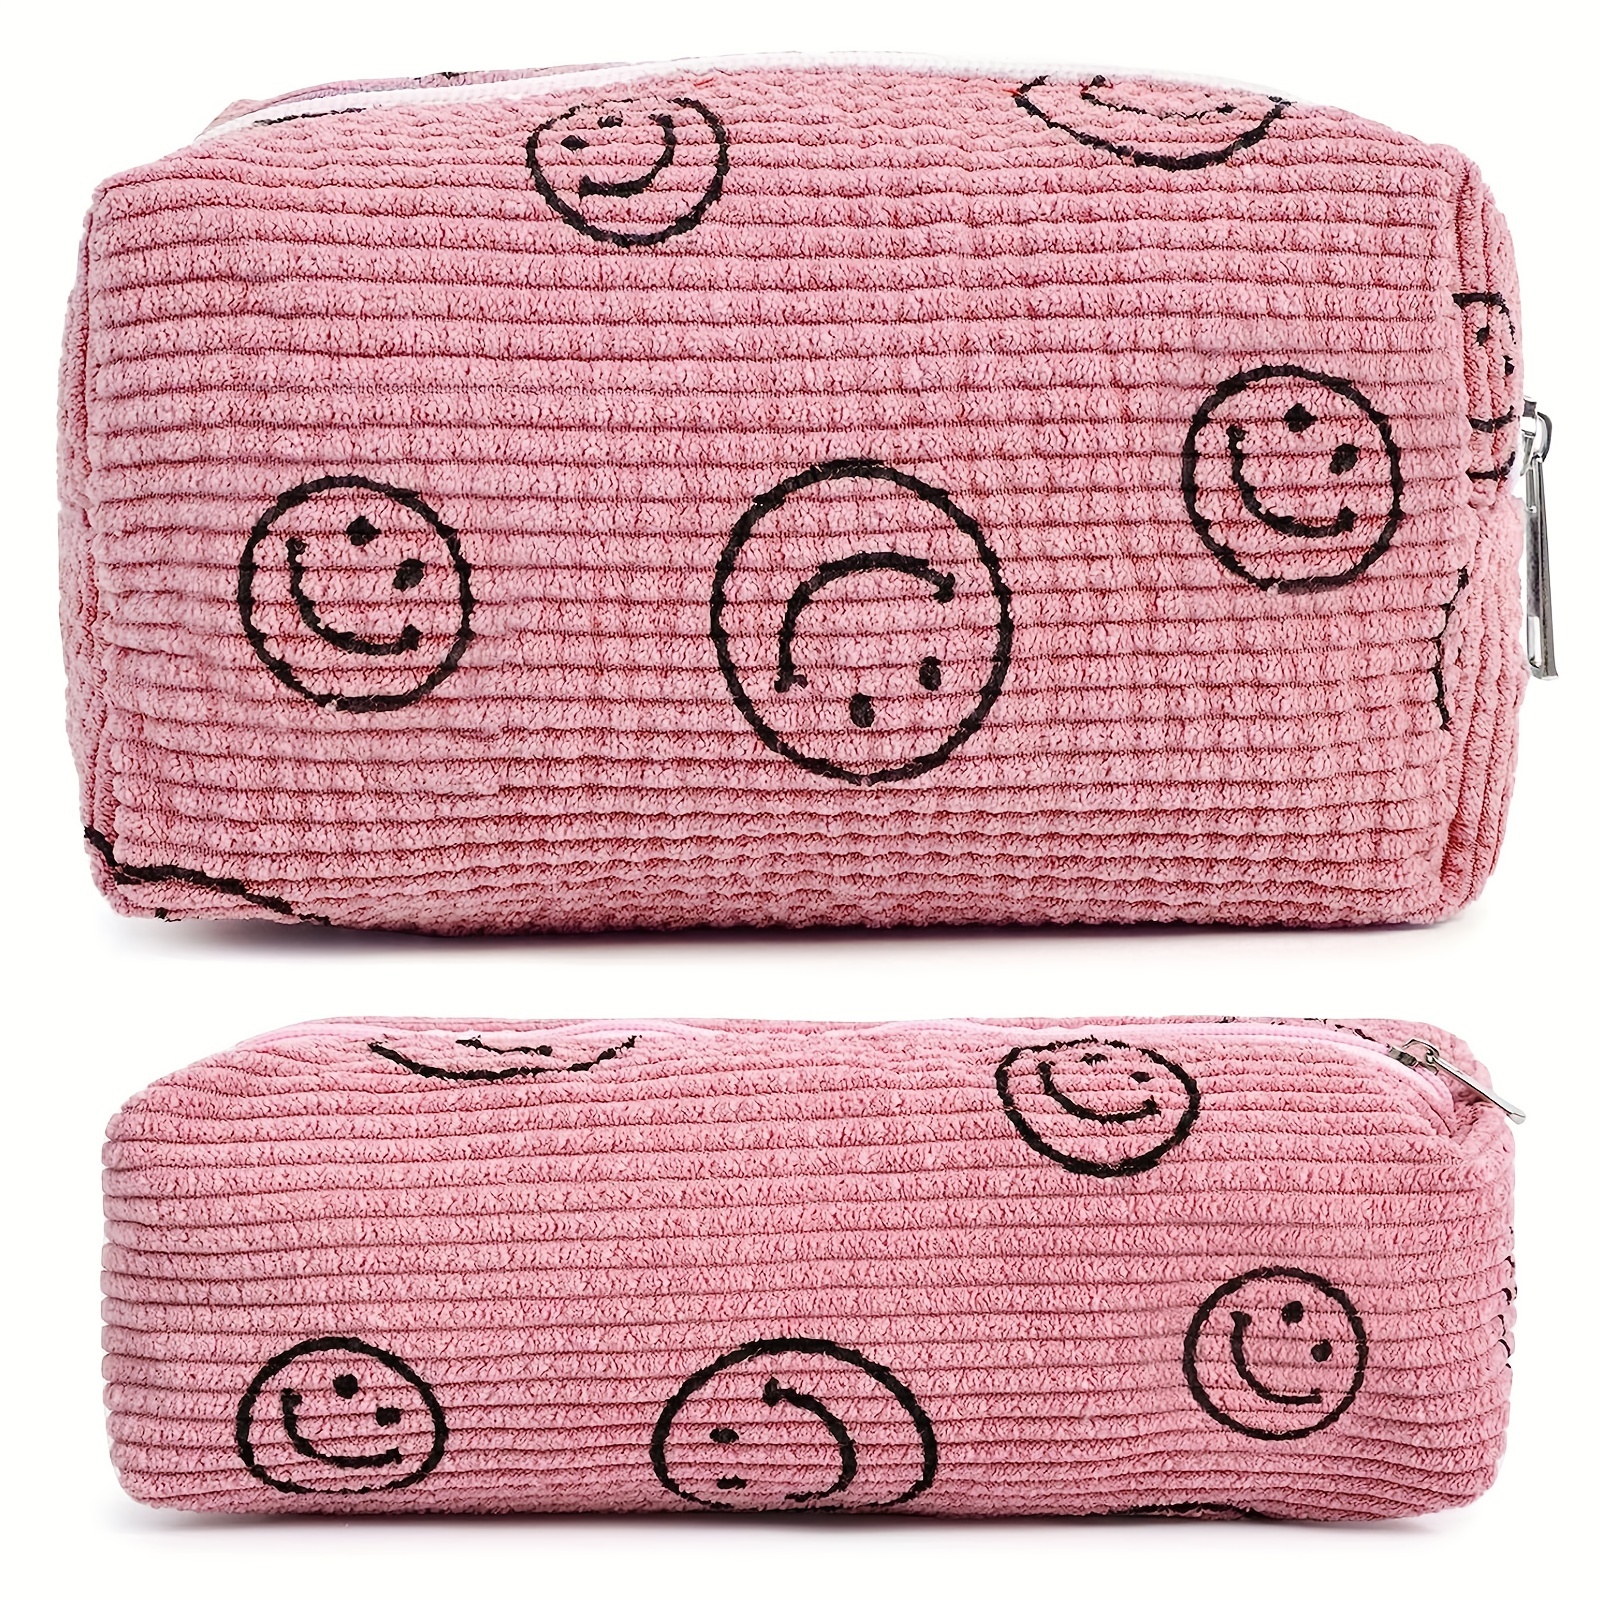 4 Pieces Canvas Cosmetic Bags Set Printed Makeup Bags with Zipper  Multi-Functional Travel Pouch for Women Girls Vacation Travel Toiletry Bag,  4 Styles